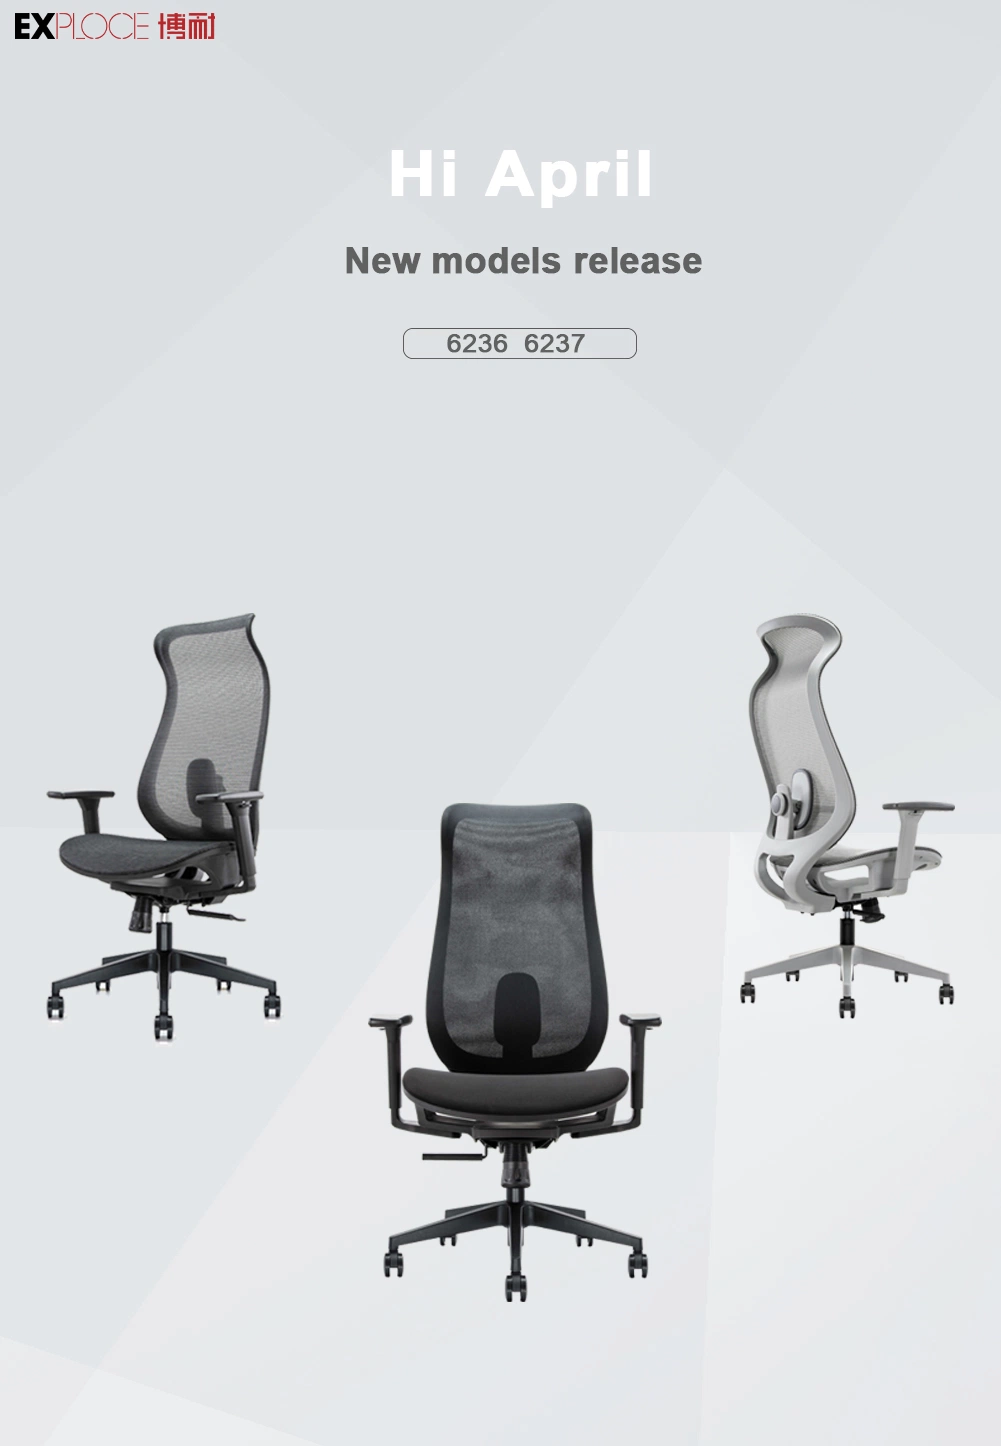 Hot Without Foam Approved BIFMA Office Chair Chairs Computer Parts Game Furniture